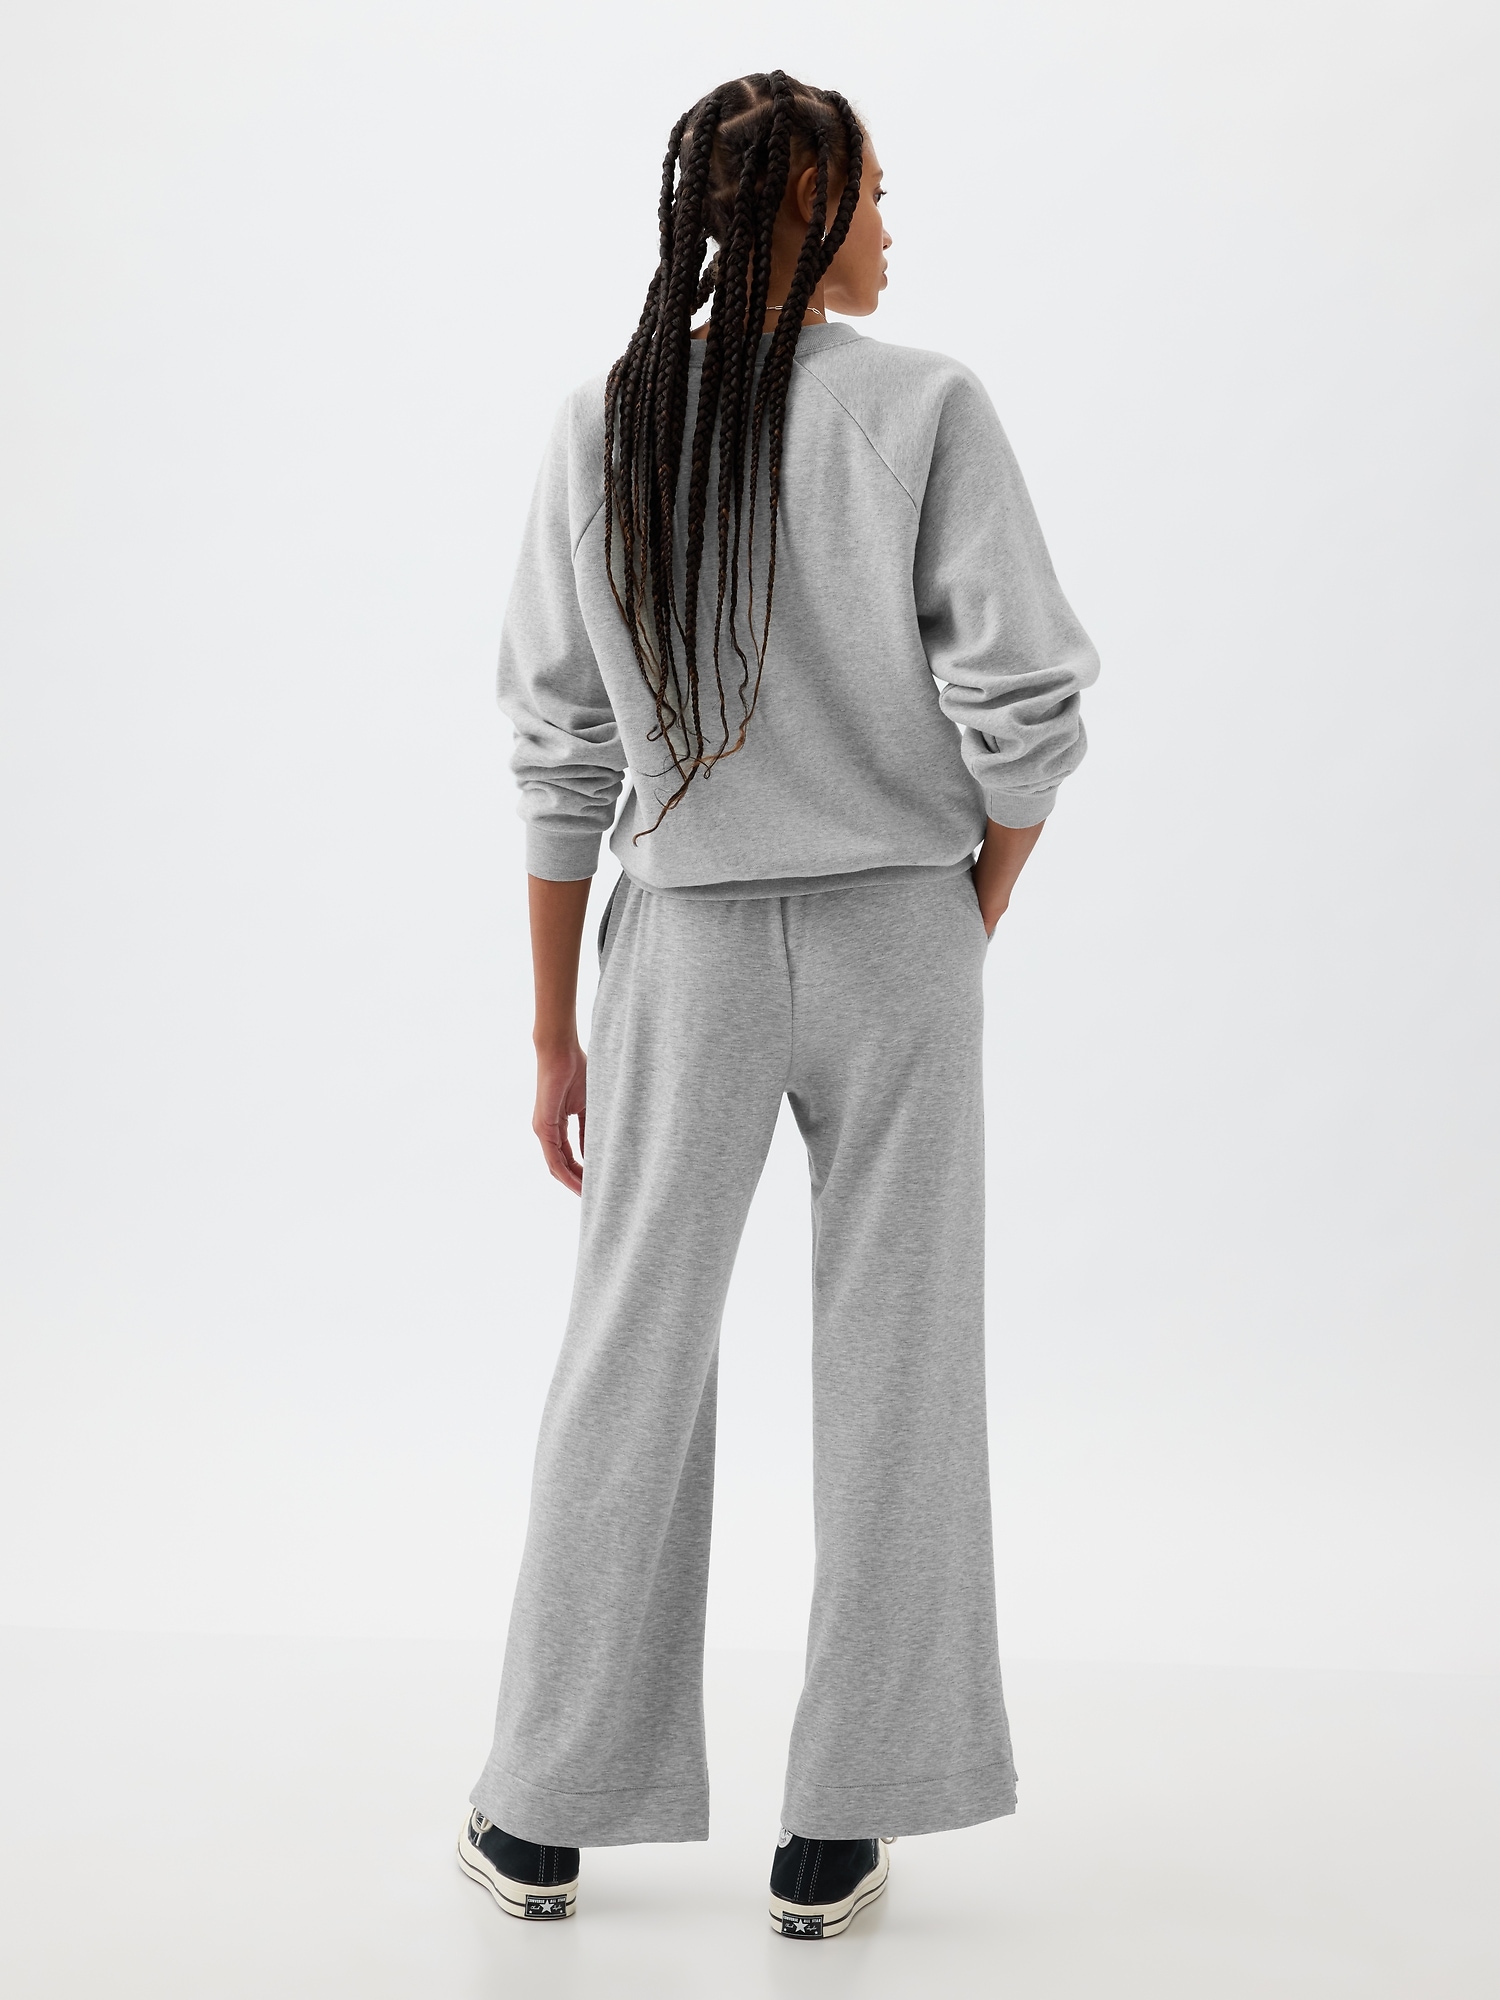  GWNWTT Women's Sweatpants Heather Gray Stacked Pants Sweatpants  (Color : Light Grey, Size : Medium) : Clothing, Shoes & Jewelry